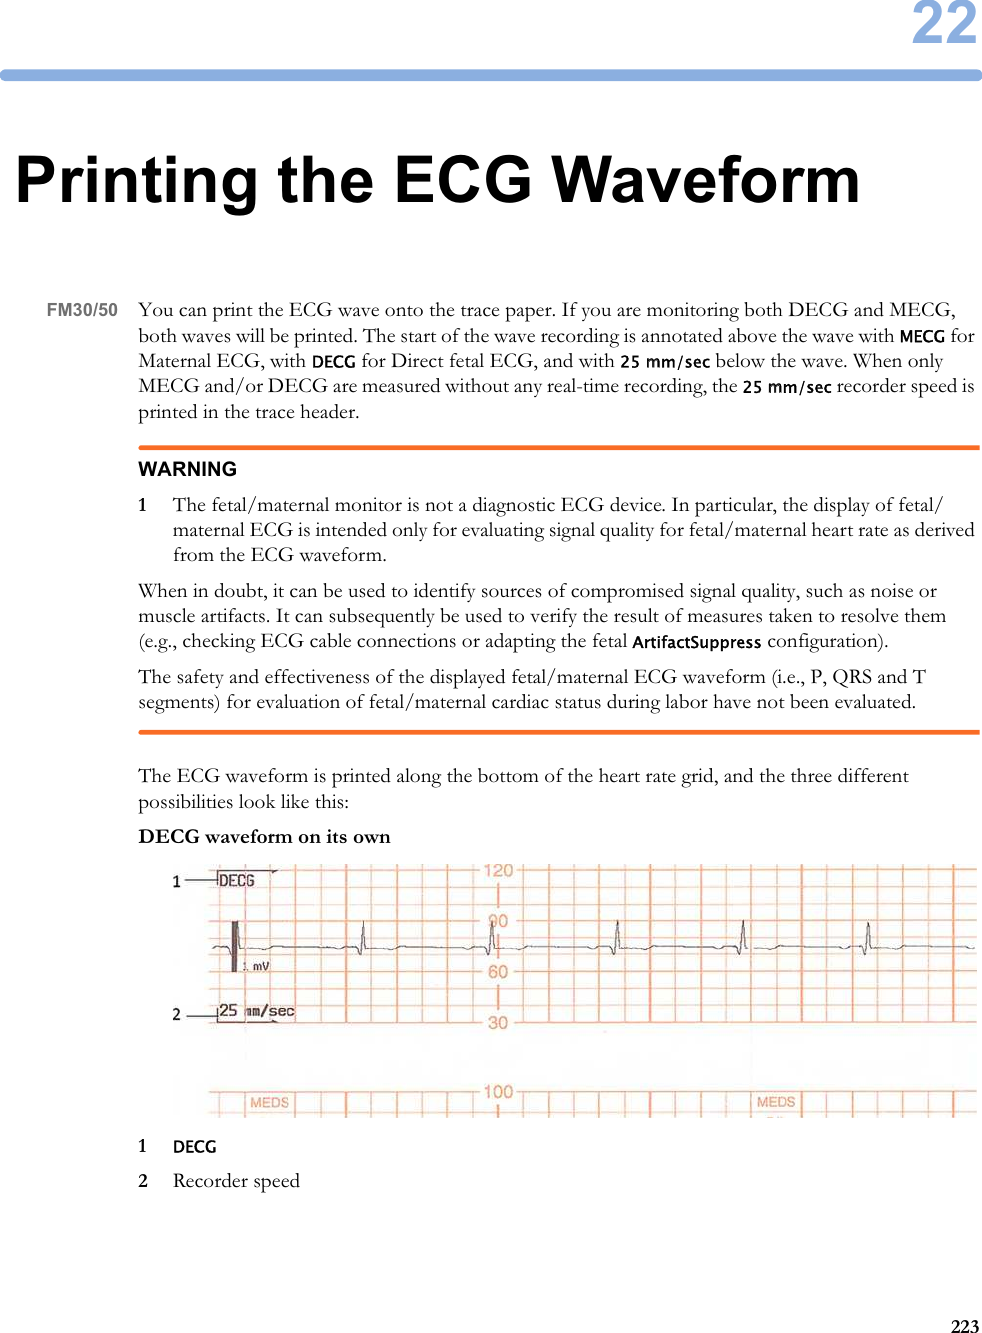 2222322Printing the ECG WaveformFM30/50 You can print the ECG wave onto the trace paper. If you are monitoring both DECG and MECG, both waves will be printed. The start of the wave recording is annotated above the wave with MECG for Maternal ECG, with DECG for Direct fetal ECG, and with 25 mm/sec below the wave. When only MECG and/or DECG are measured without any real-time recording, the 25 mm/sec recorder speed is printed in the trace header.WARNING1The fetal/maternal monitor is not a diagnostic ECG device. In particular, the display of fetal/maternal ECG is intended only for evaluating signal quality for fetal/maternal heart rate as derived from the ECG waveform.When in doubt, it can be used to identify sources of compromised signal quality, such as noise or muscle artifacts. It can subsequently be used to verify the result of measures taken to resolve them (e.g., checking ECG cable connections or adapting the fetal ArtifactSuppress configuration).The safety and effectiveness of the displayed fetal/maternal ECG waveform (i.e., P, QRS and T segments) for evaluation of fetal/maternal cardiac status during labor have not been evaluated.The ECG waveform is printed along the bottom of the heart rate grid, and the three different possibilities look like this:DECG waveform on its own1DECG2Recorder speed